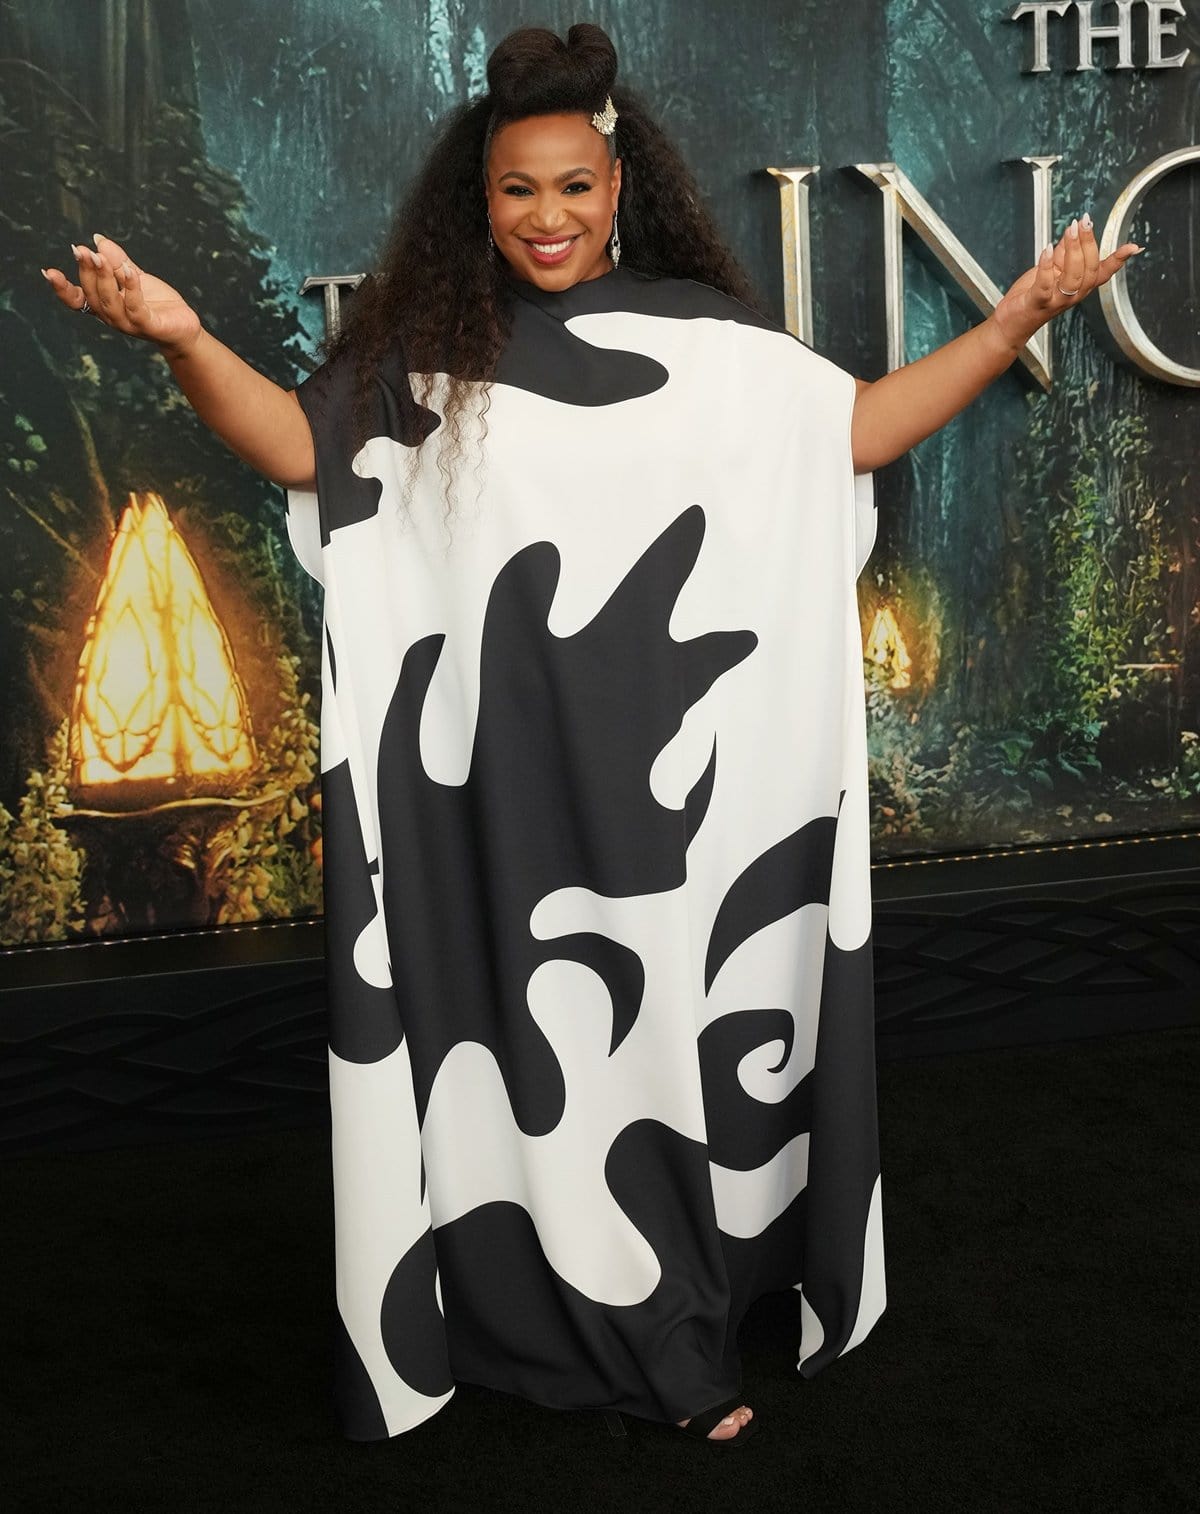 Sophia Nomvete in a black and white dress at "The Lord Of The Rings: The Rings Of Power" New York Special Screening